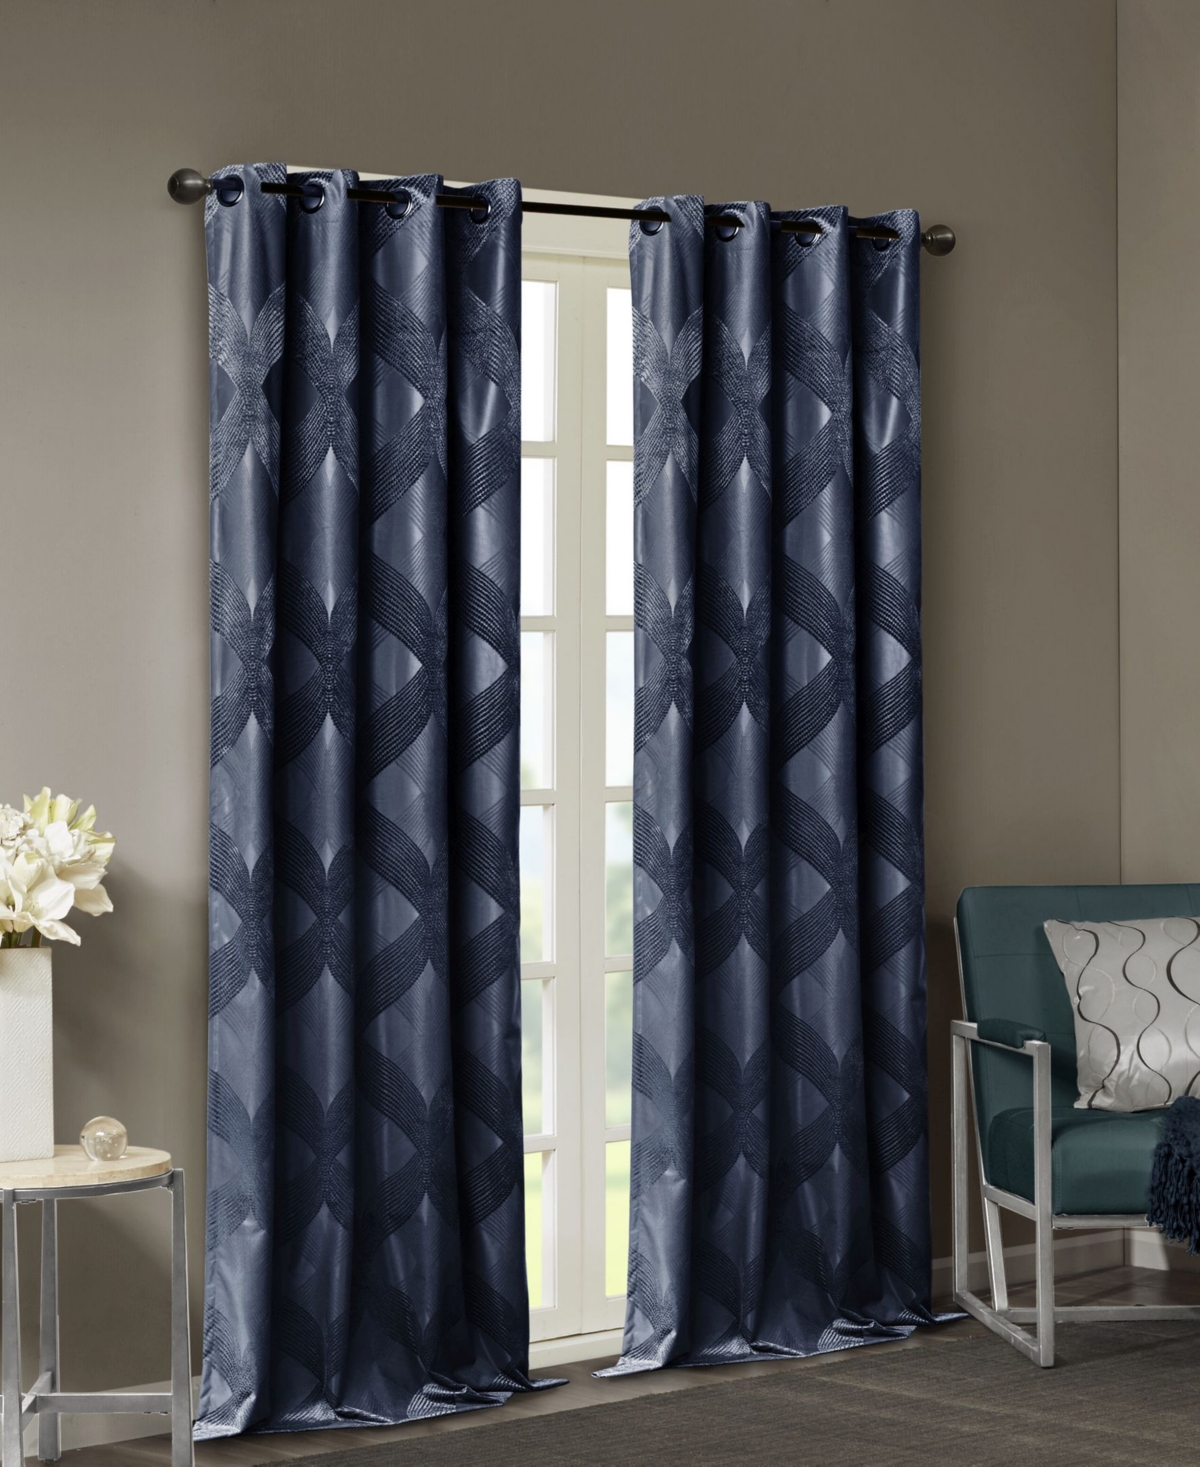 Bentley Ogee Knitted Jacquard Total Blackout Curtain Panel, 50"W x 84"L - Charcoal